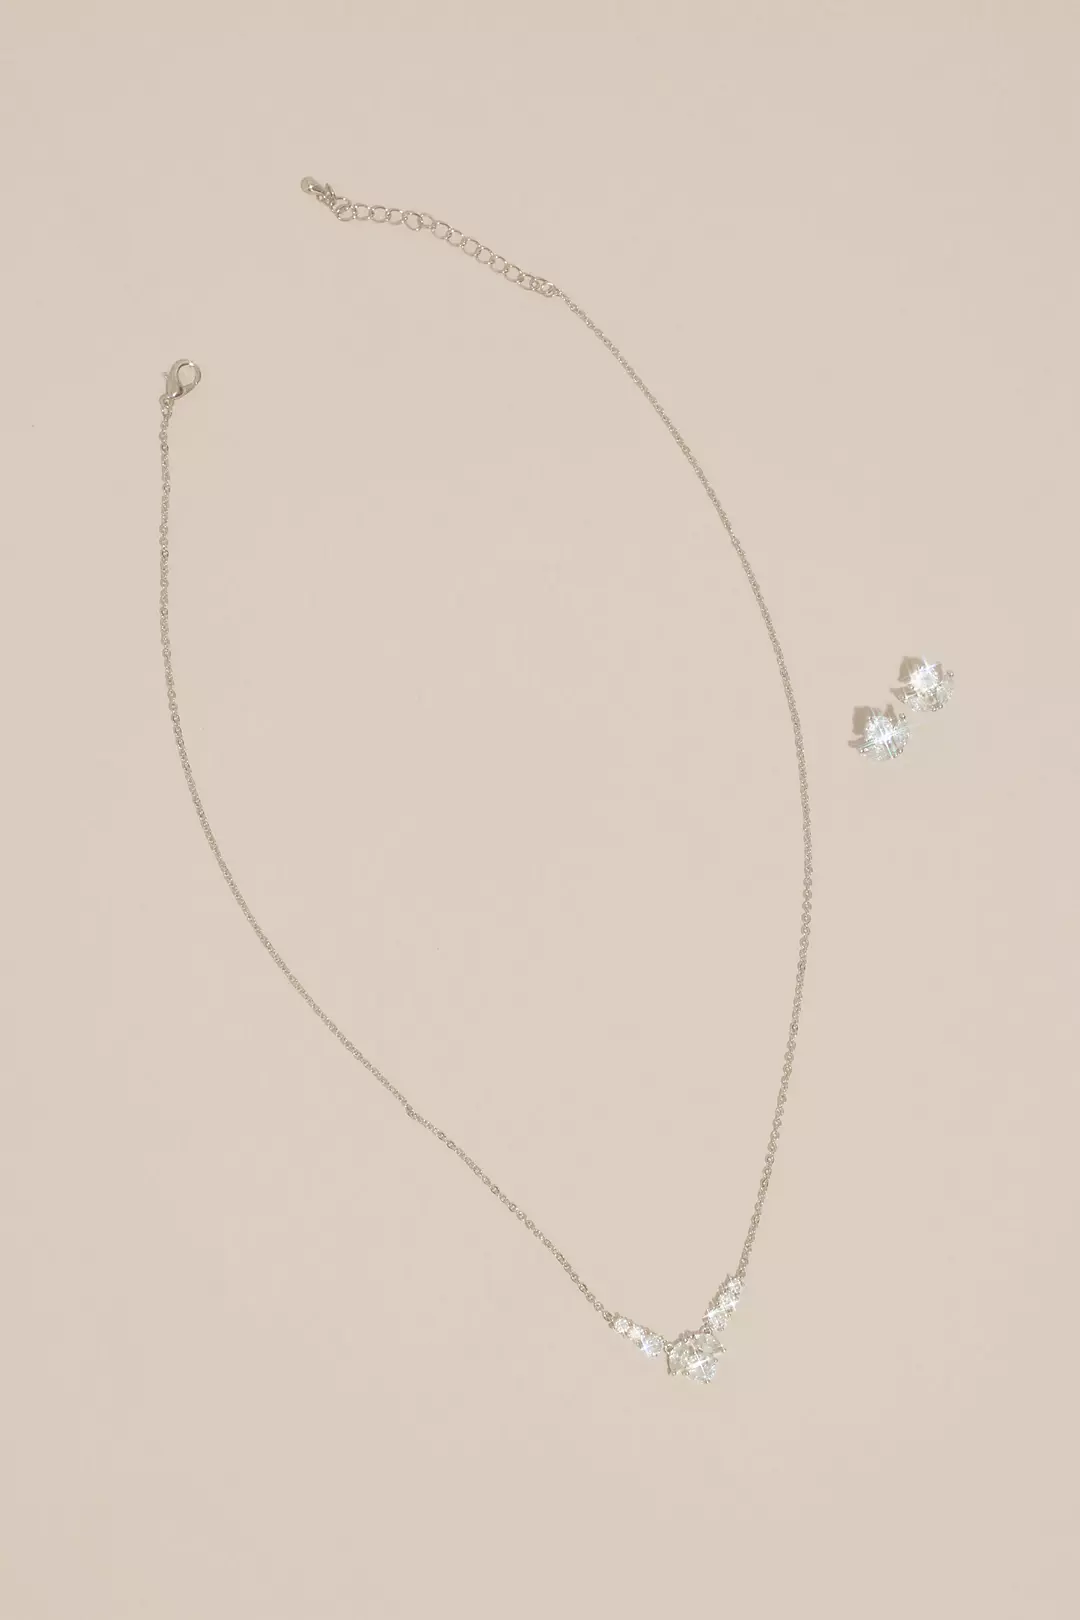 Cubic Zirconia Rosebud Necklace and Earring Set Image